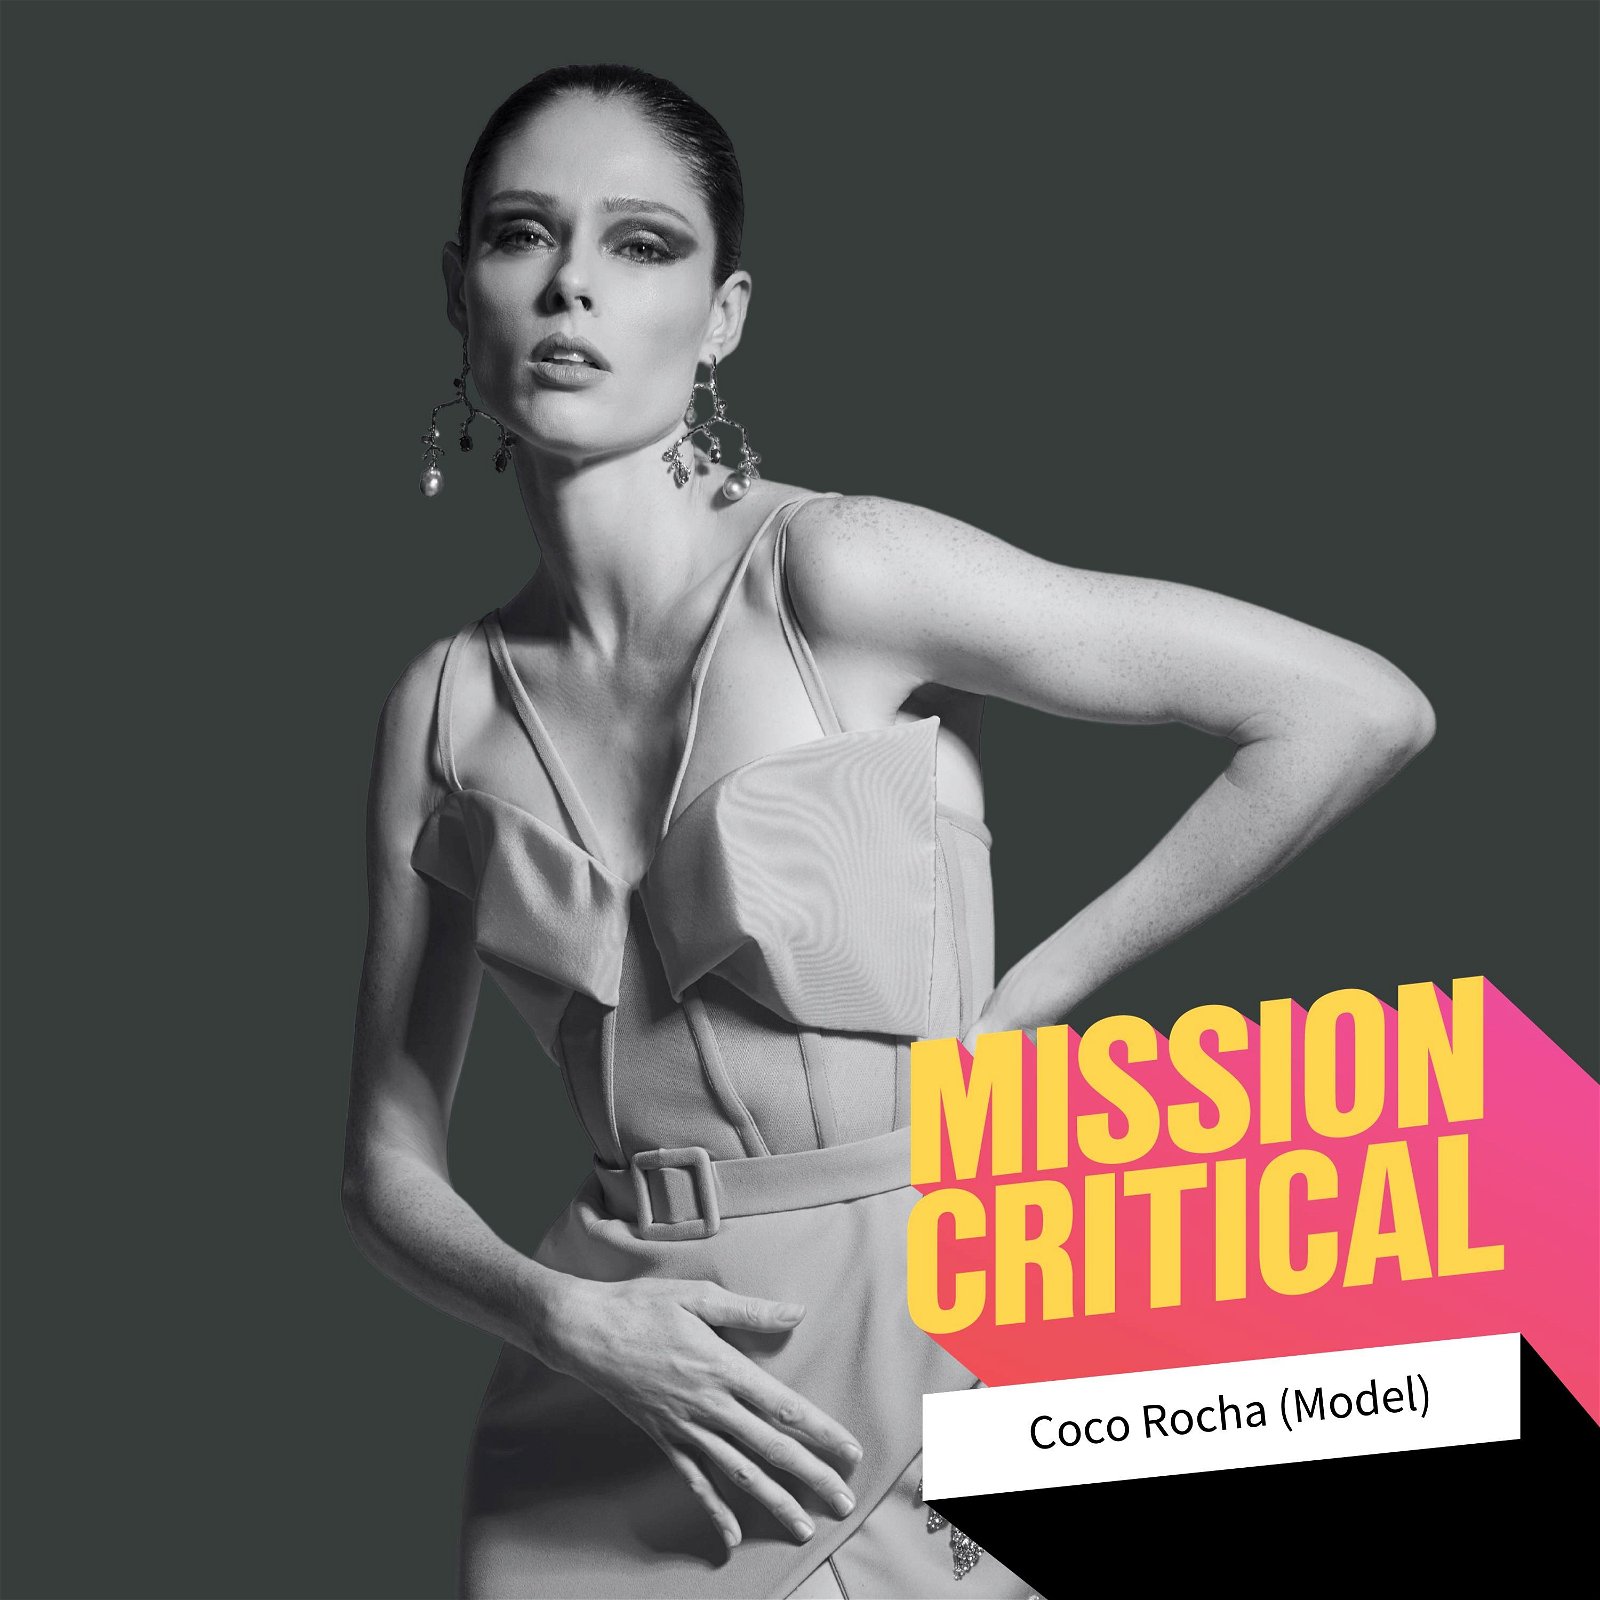 Coco Rocha (Model): Lessons from the Catwalk on Success, Self-Advocacy, and Mentorship